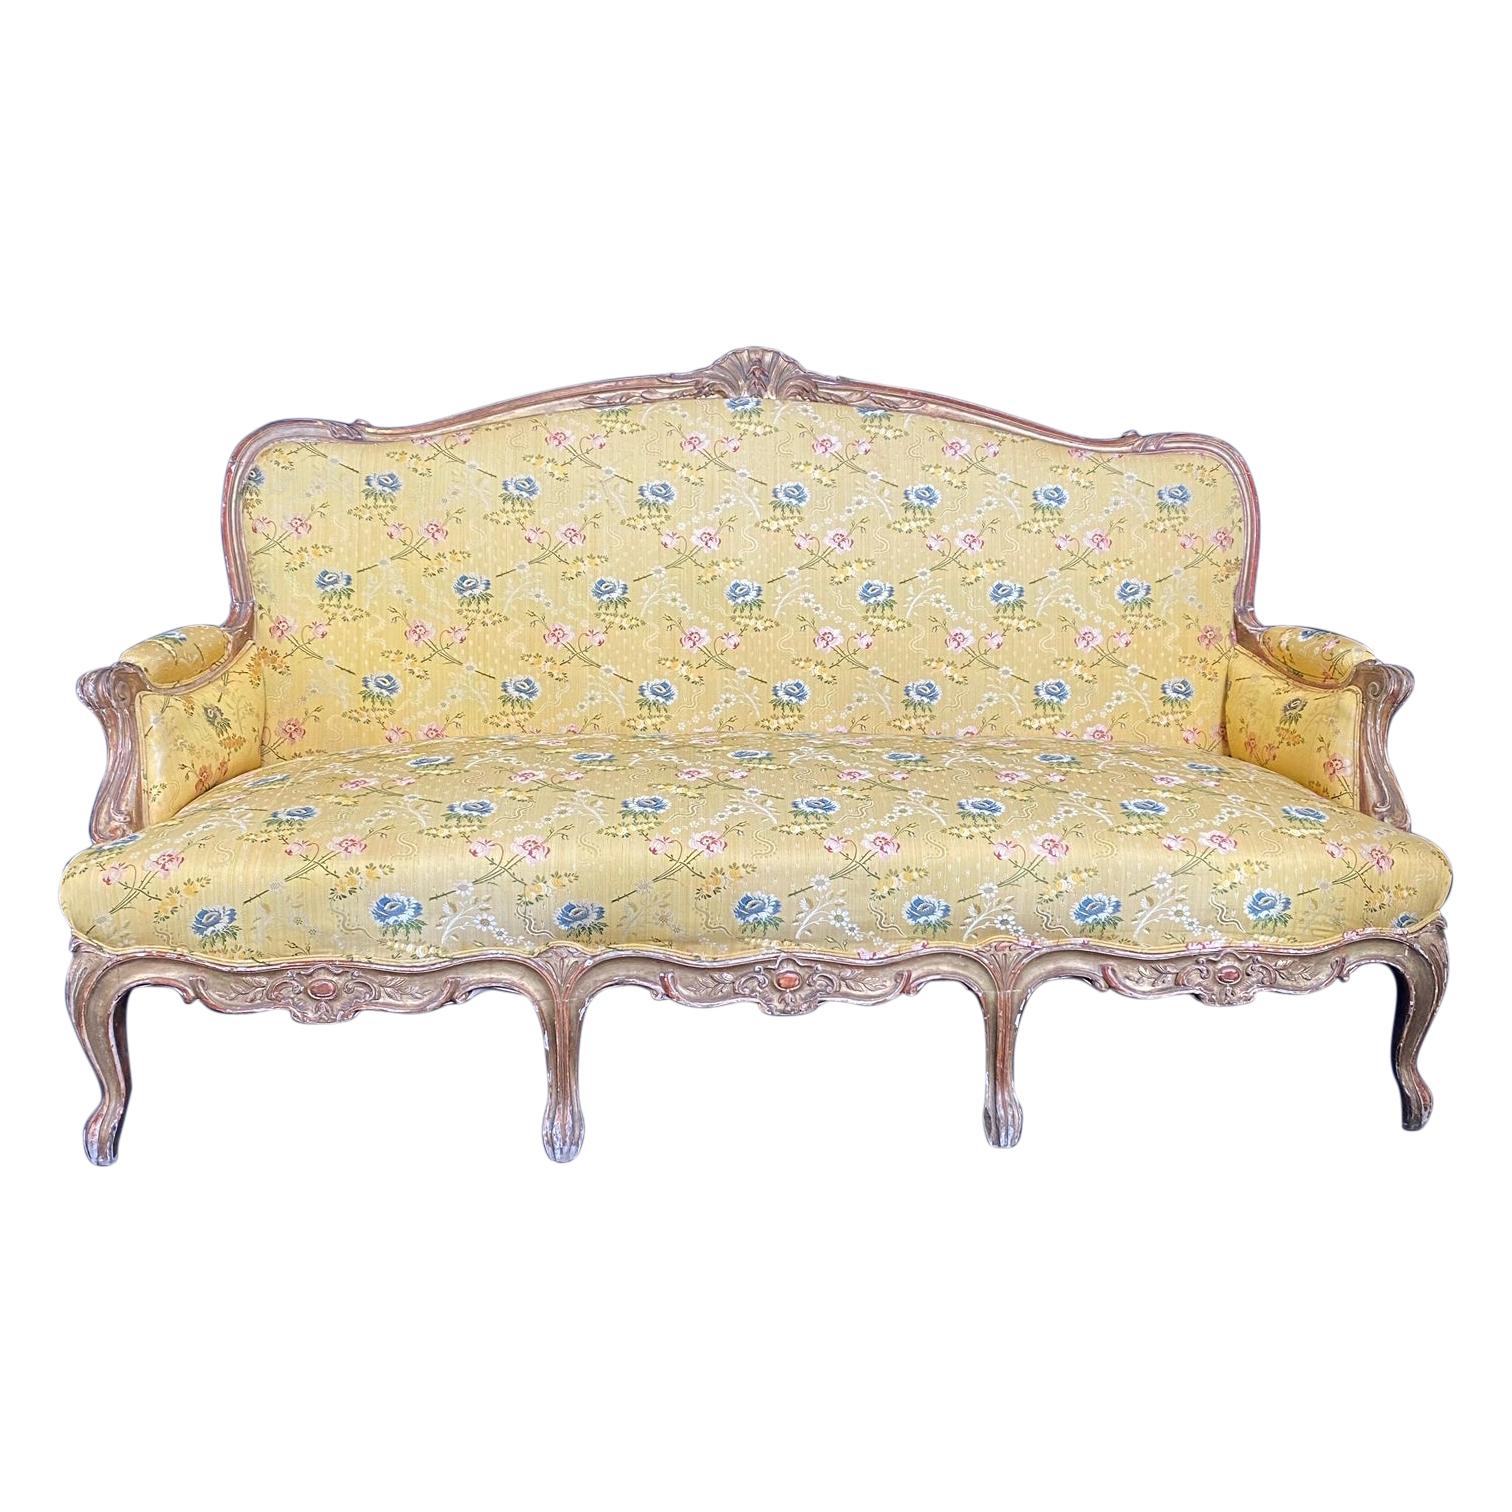 Superb Carved Gilded 19th Century Louis XV French Provencal Sofa